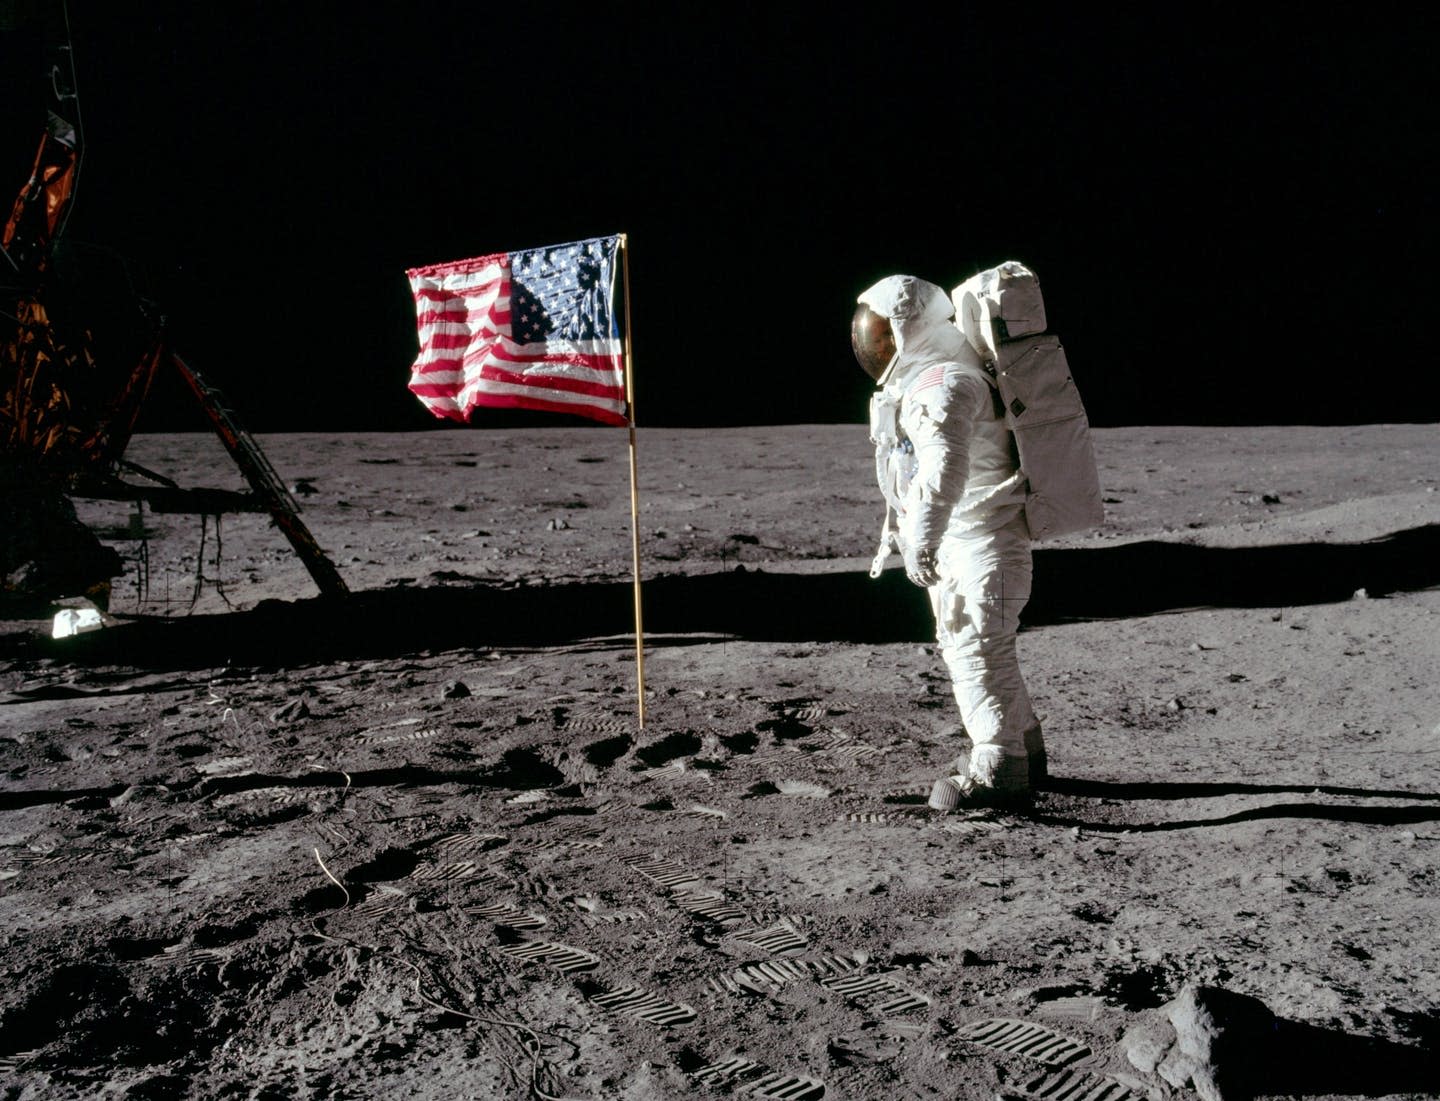 Apollo landers, Neil Armstrong’s boot print and other human artifacts on Moon officially protected by new US legislation